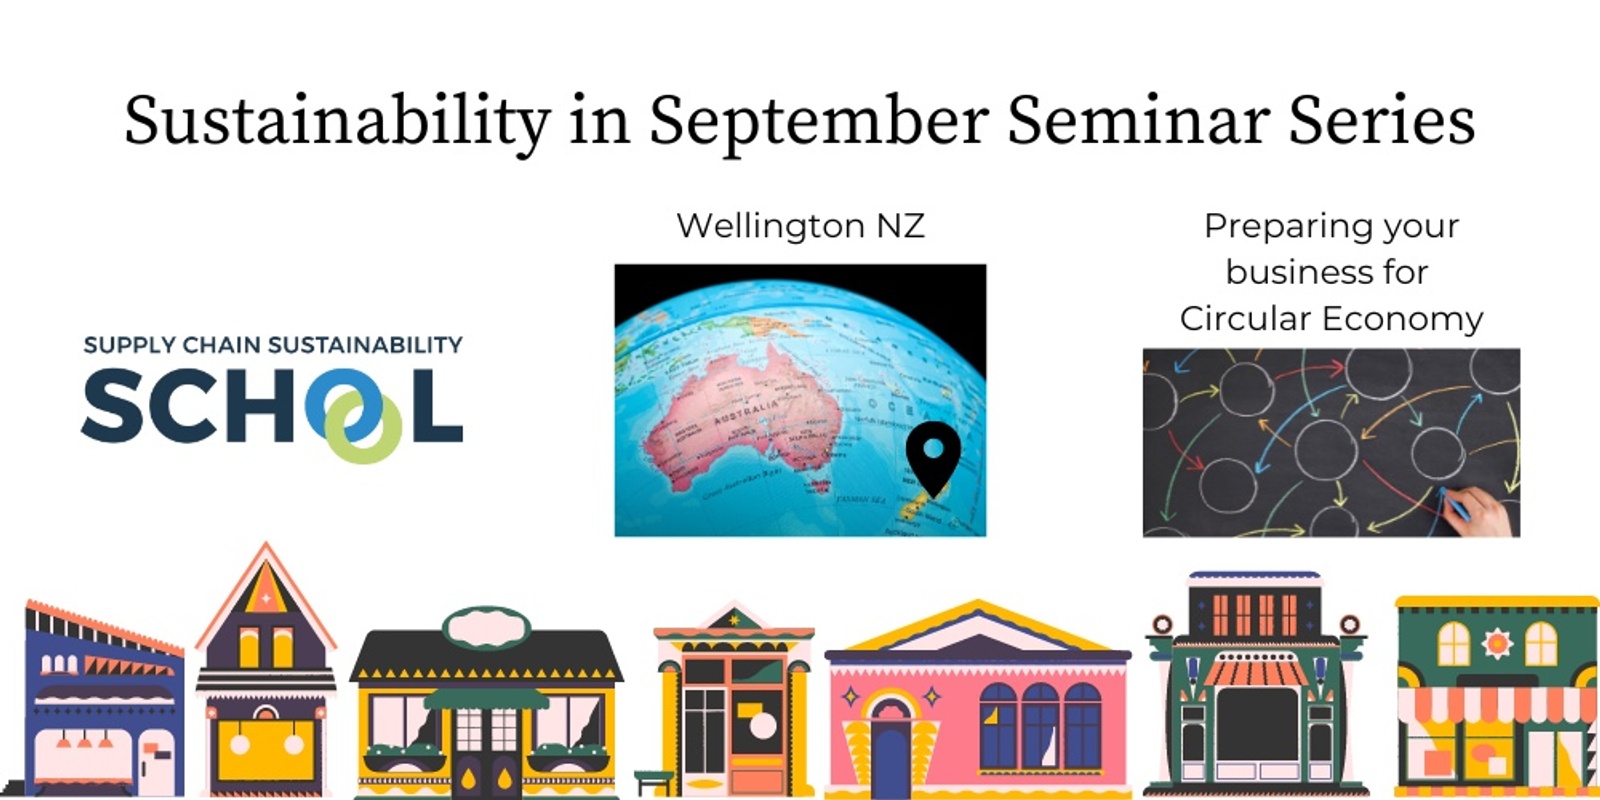 Banner image for Preparing your business for Circular Economy | WLG | Sustainability in September Seminar Series